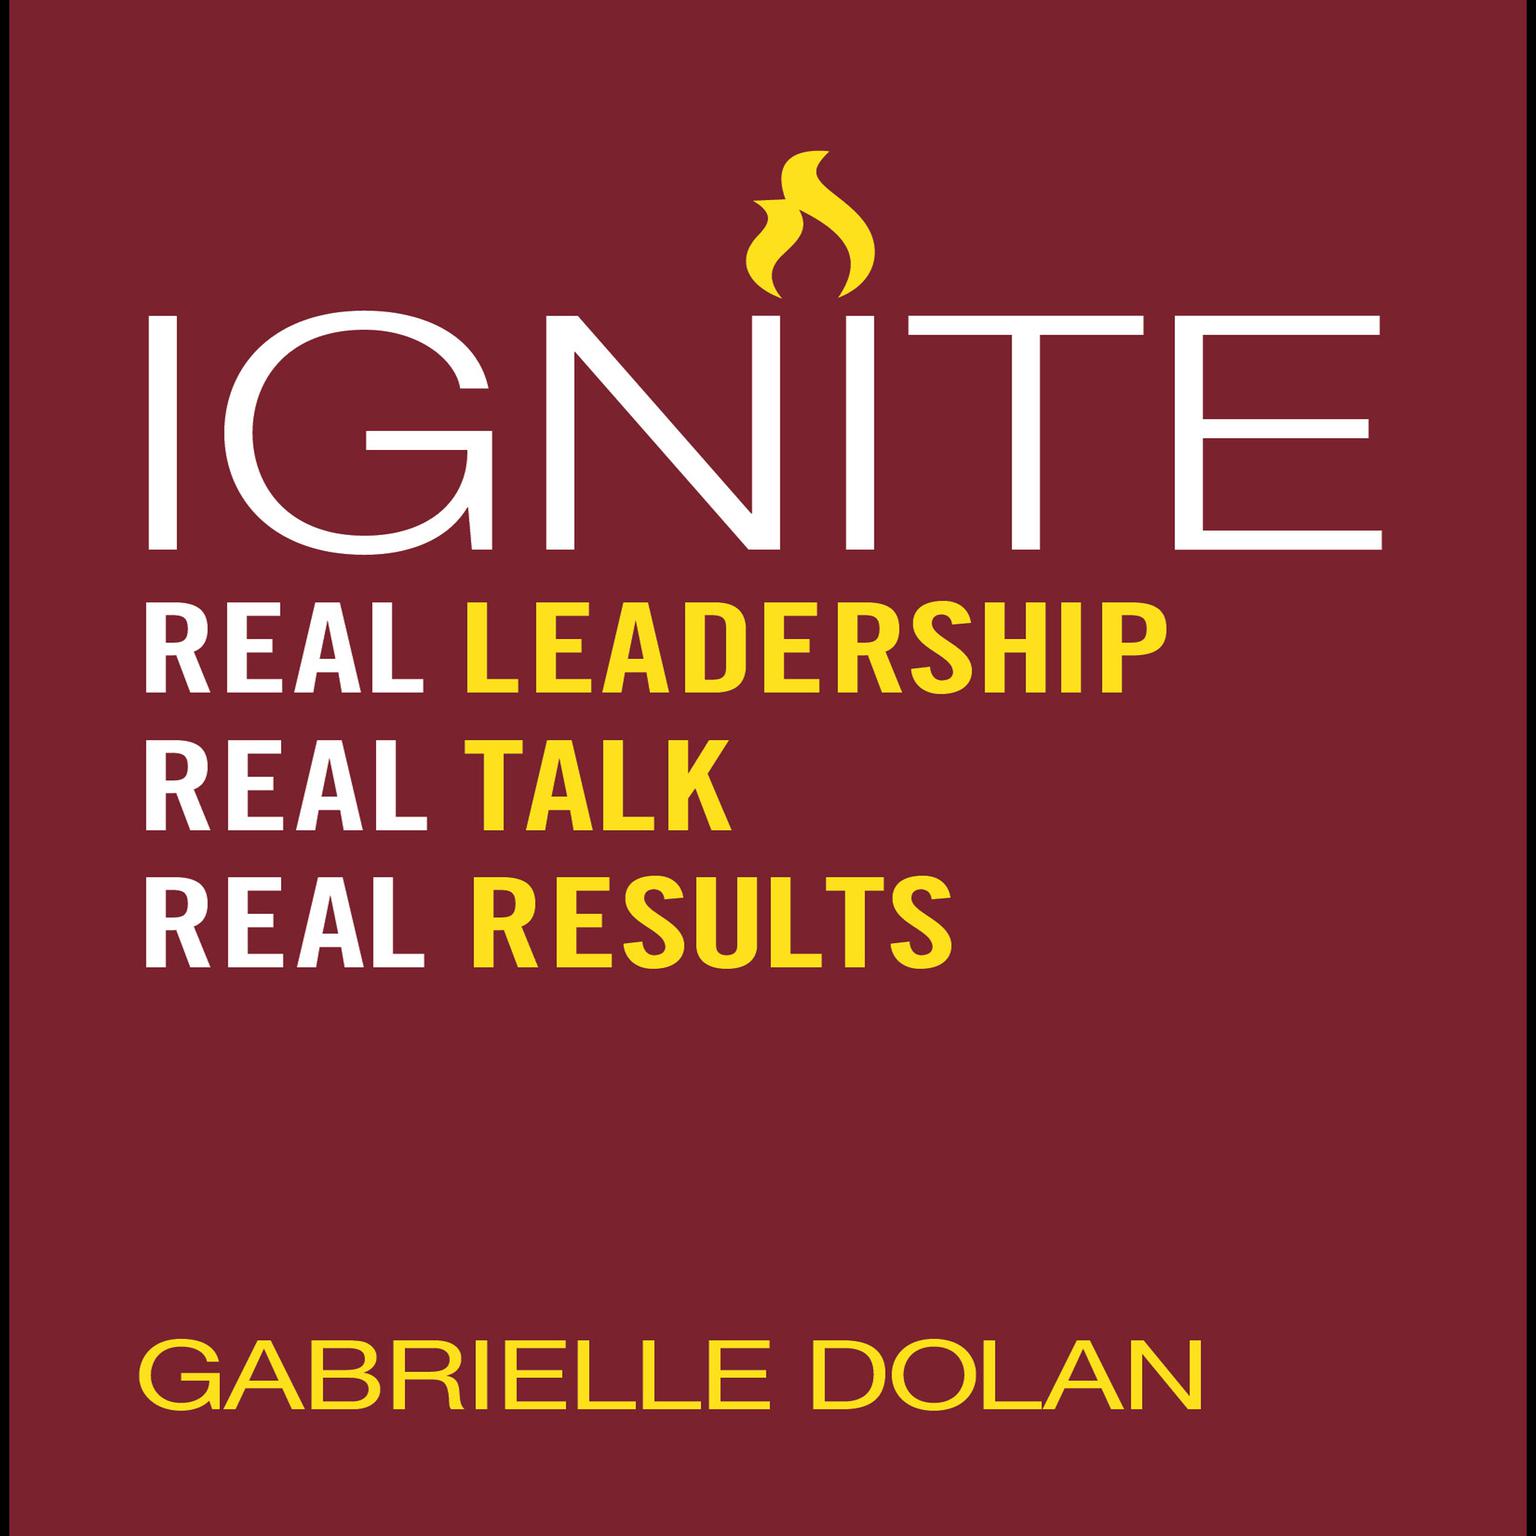 Ignite: Real Leadership, Real Talk, Real Results Audiobook, by Gabrielle Dolan